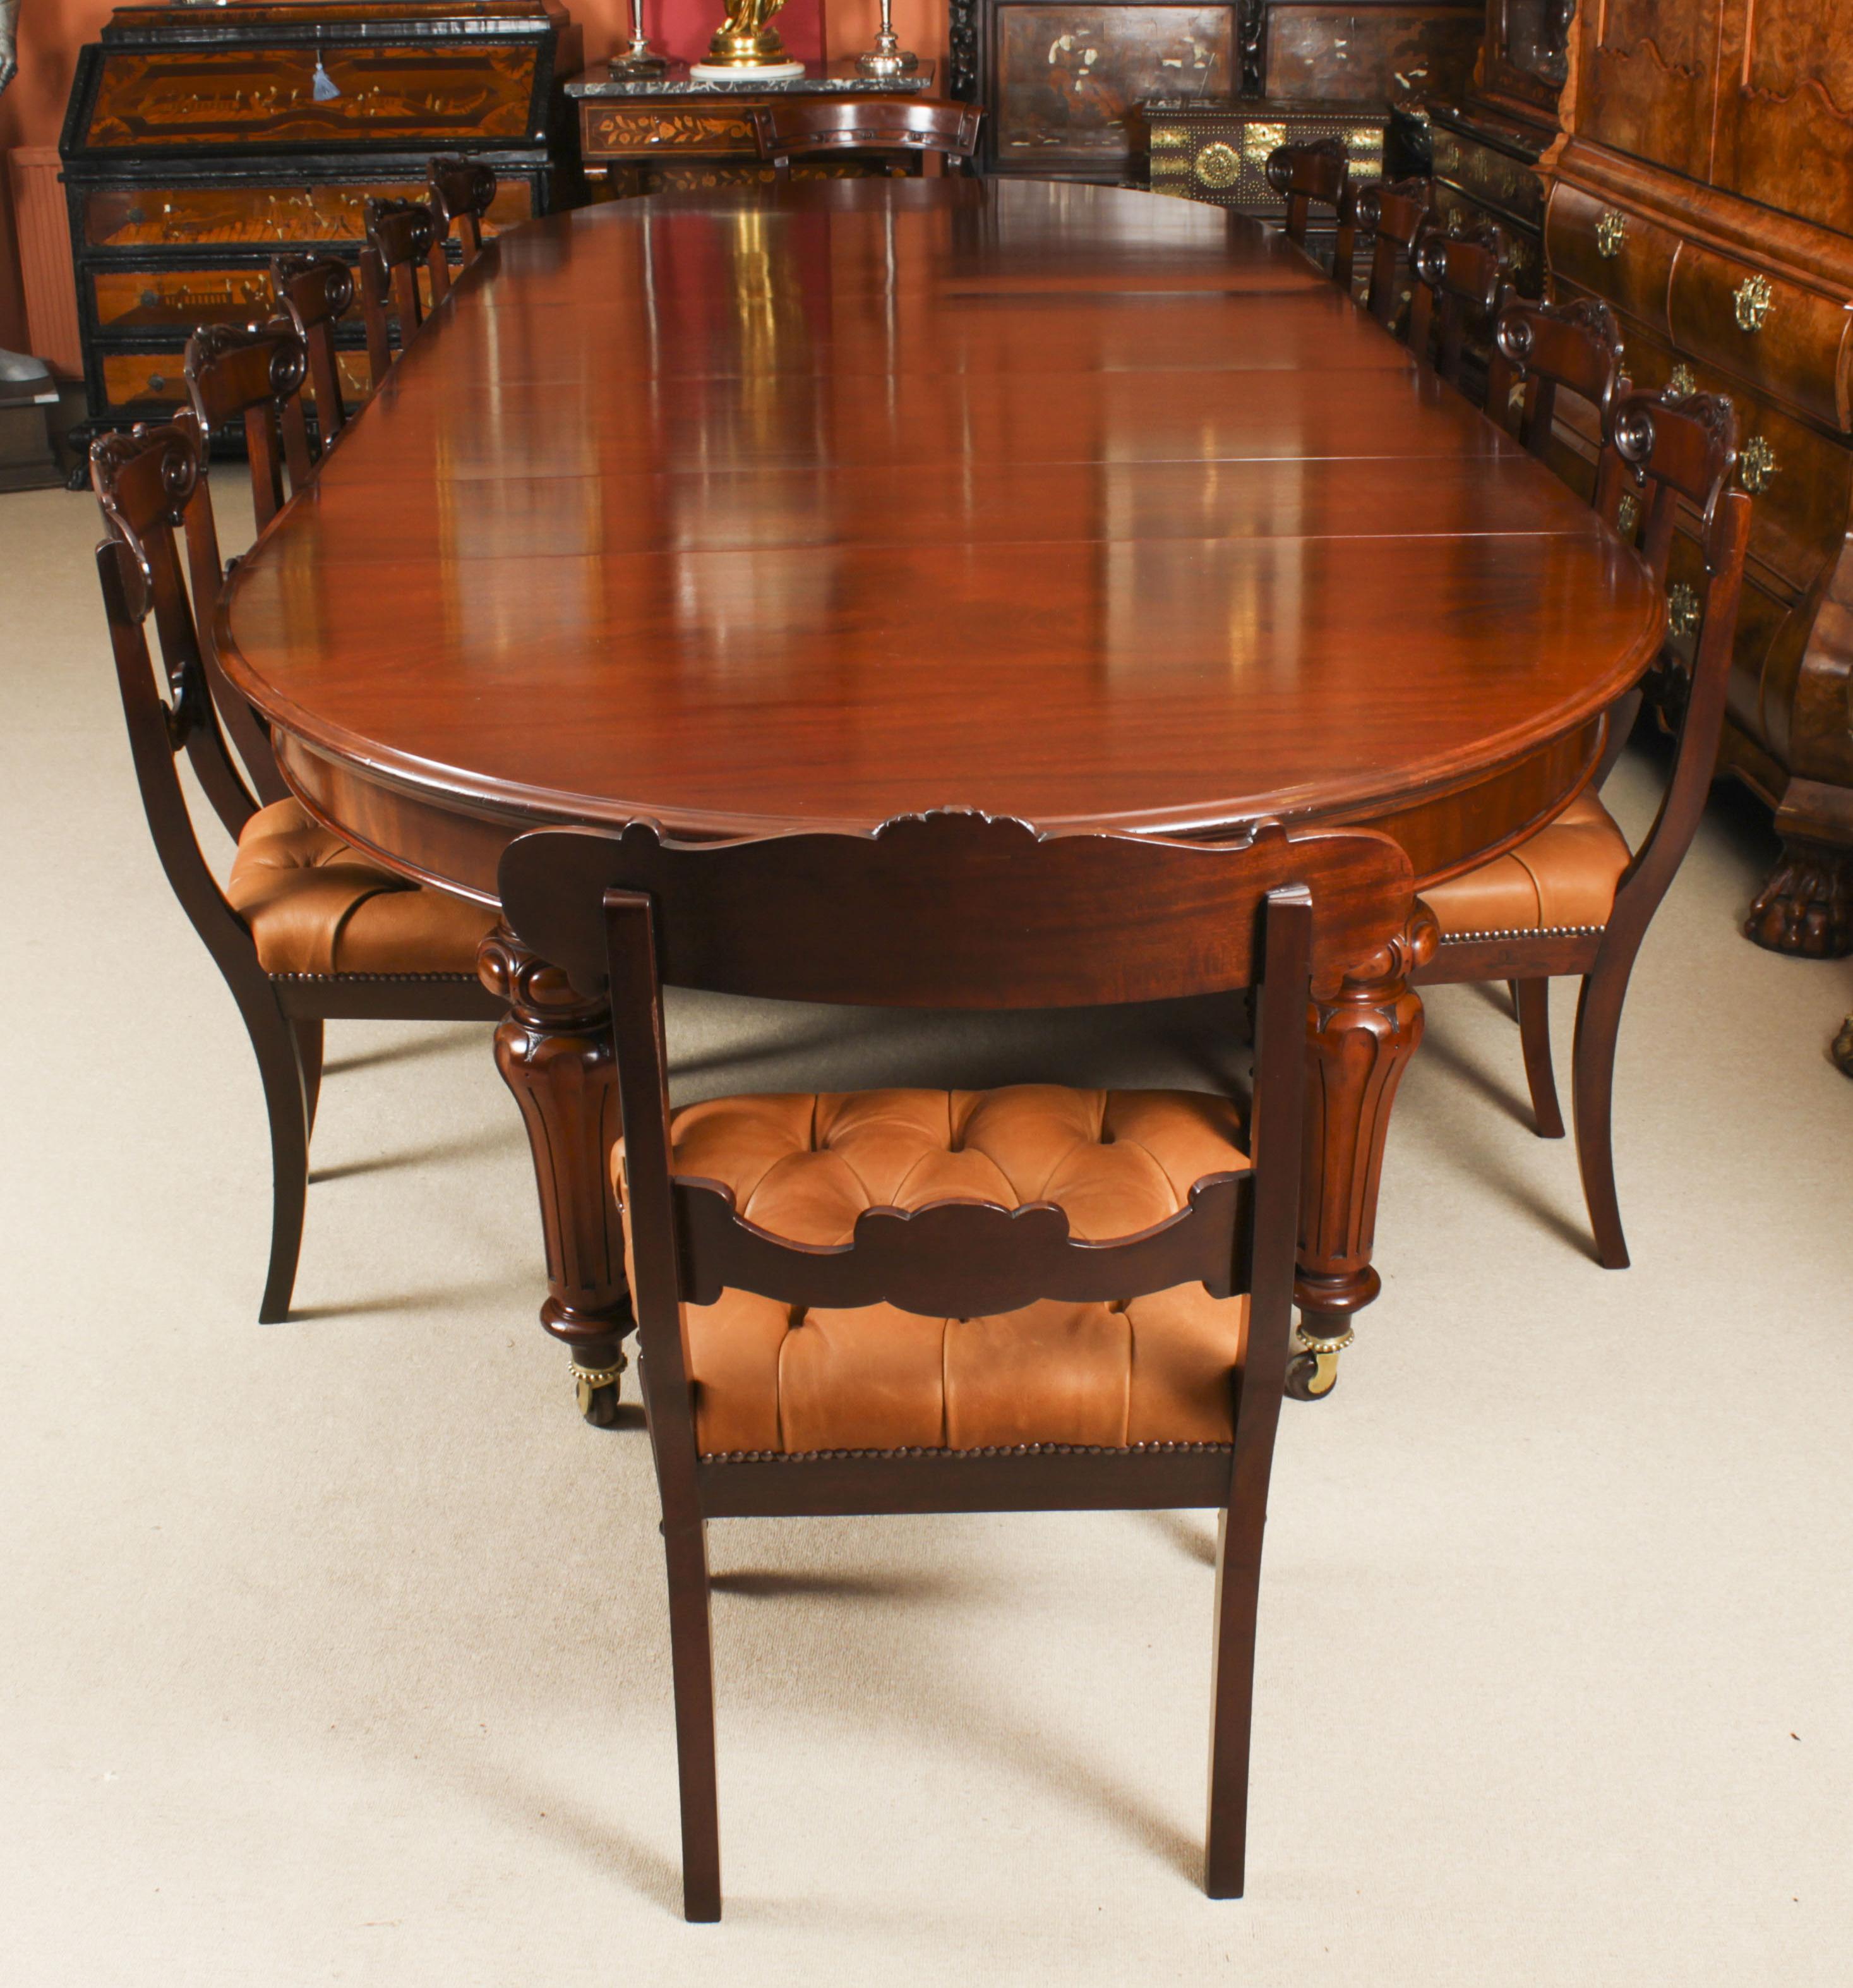 Mid-19th Century Antique 13ft William IV Oval Flame Mahogany Extending Dining Table 19th C